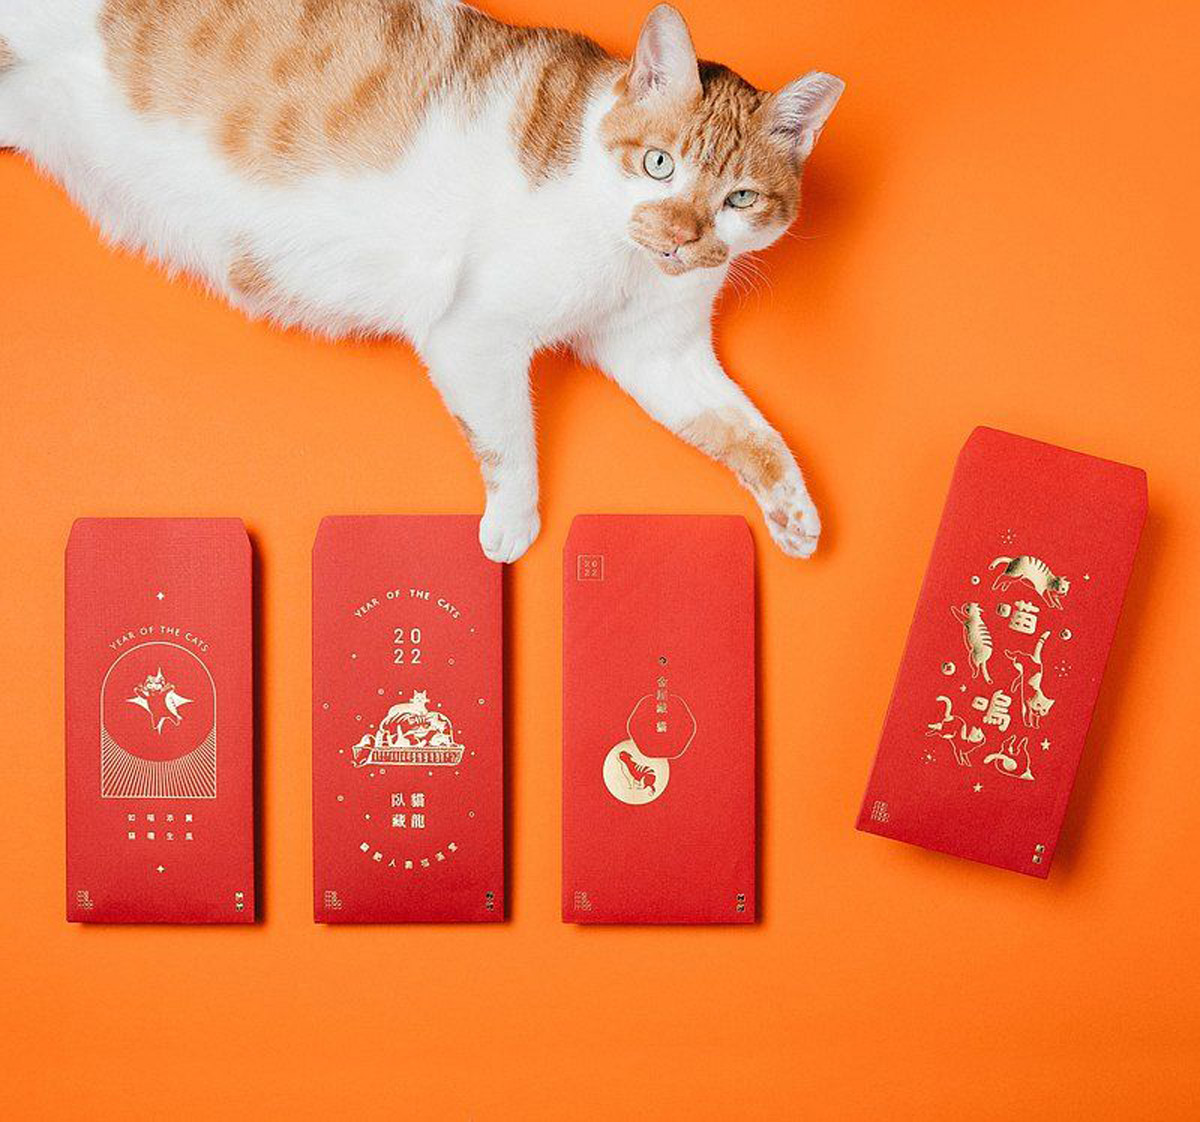 4 Fun Ideas for a Chinese New Year Celebration with Your Furkids!